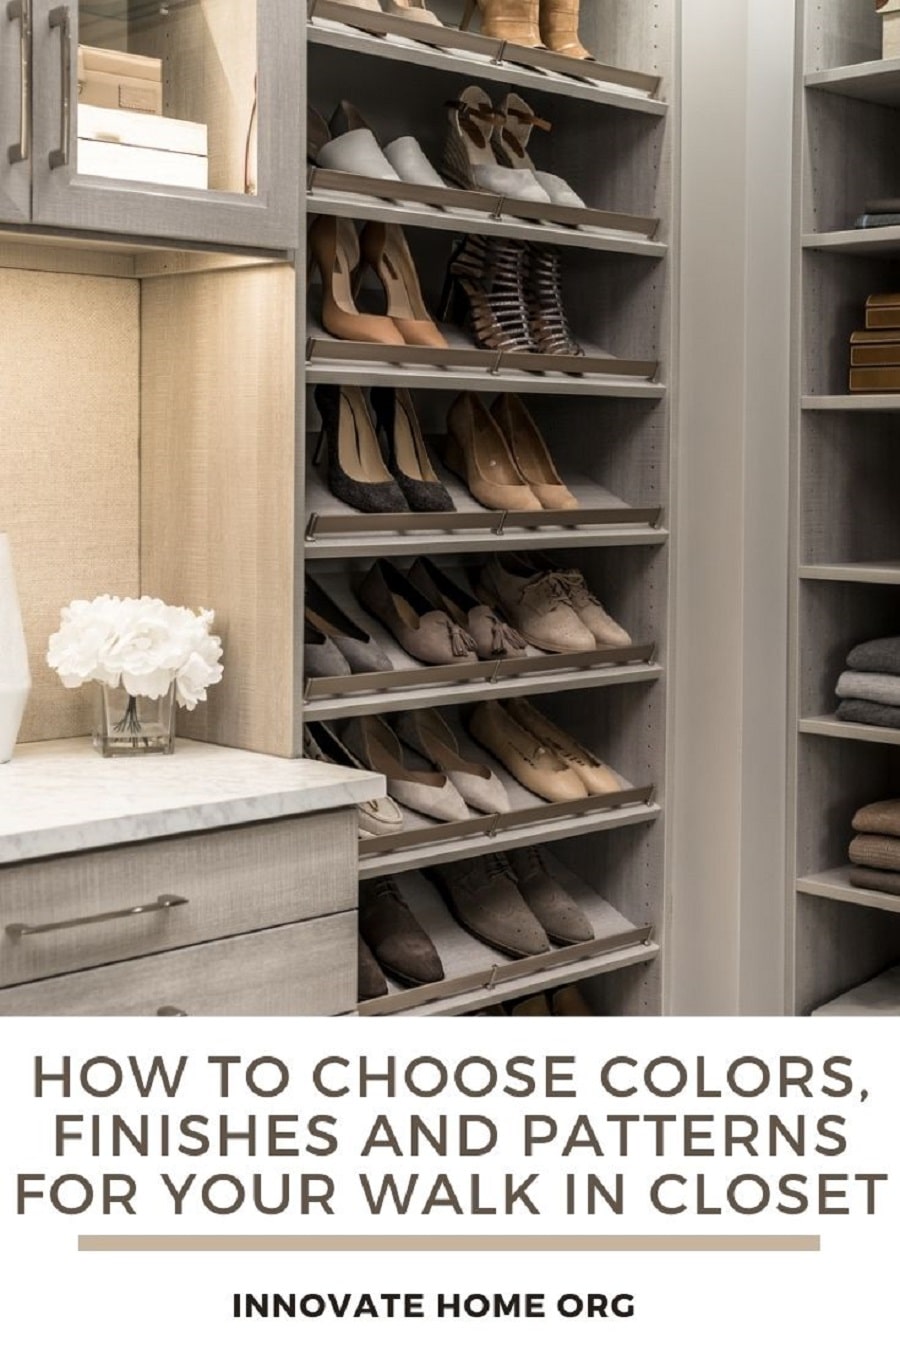 Question 9 How to choose colors finishes patterns columbus closet | Innovate Home Org #ClosetPattern #ClosetFinish #ClosetColor